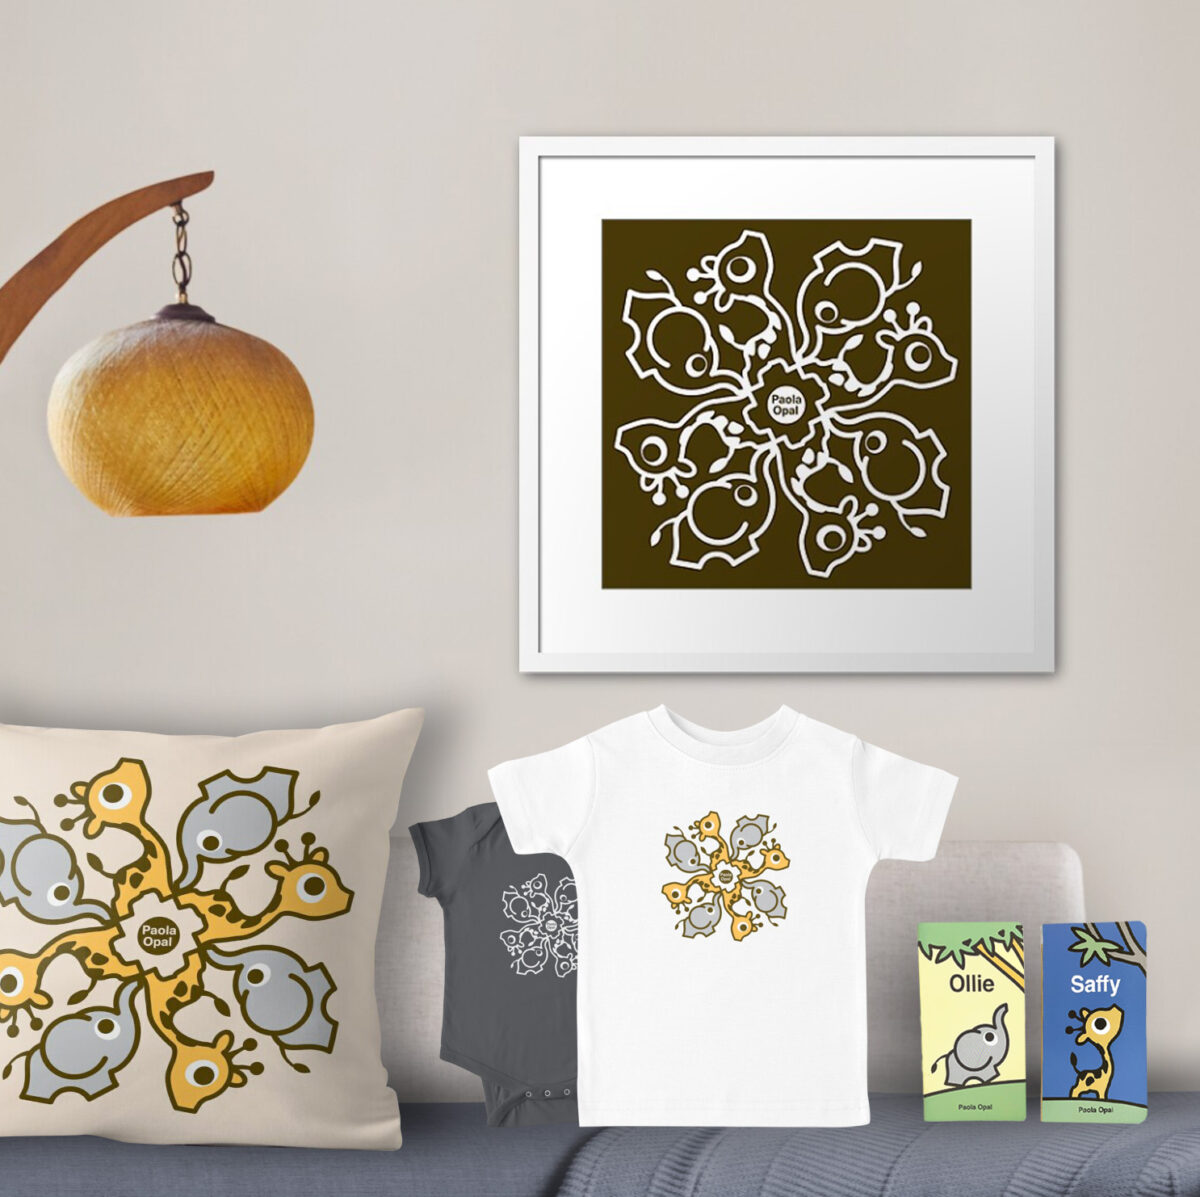 Art print, pillow, t-shirt, baby onesie and books featuring Saffy the giraffe and Ollie the elephant